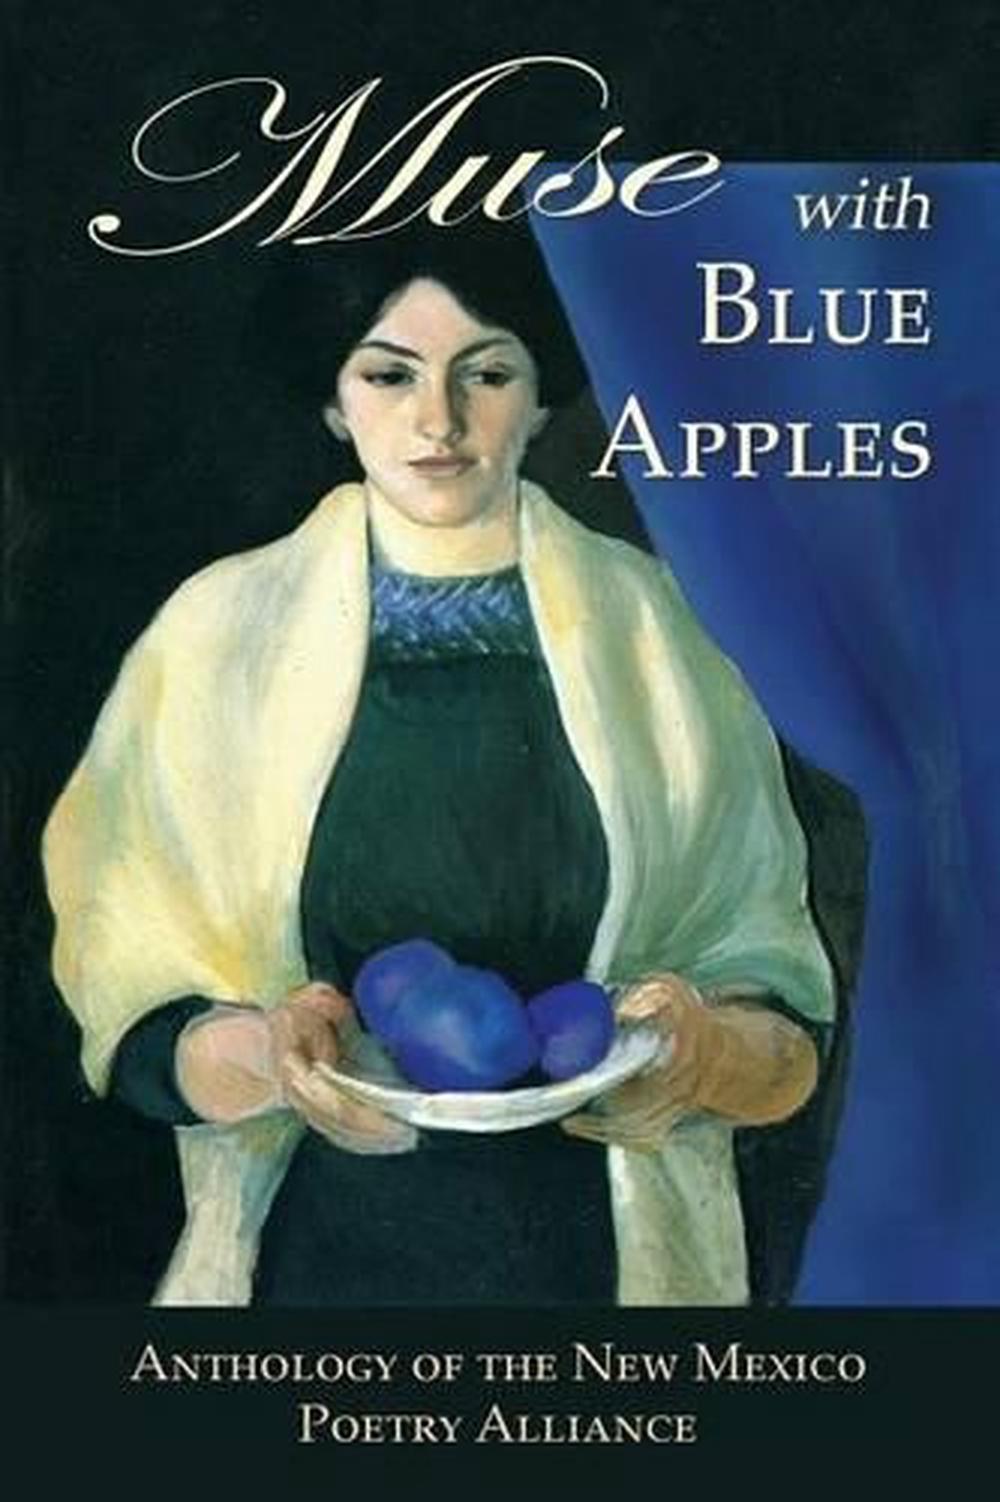 Muse with Blue Apples Anthology of the New Mexico Poetry Alliance by